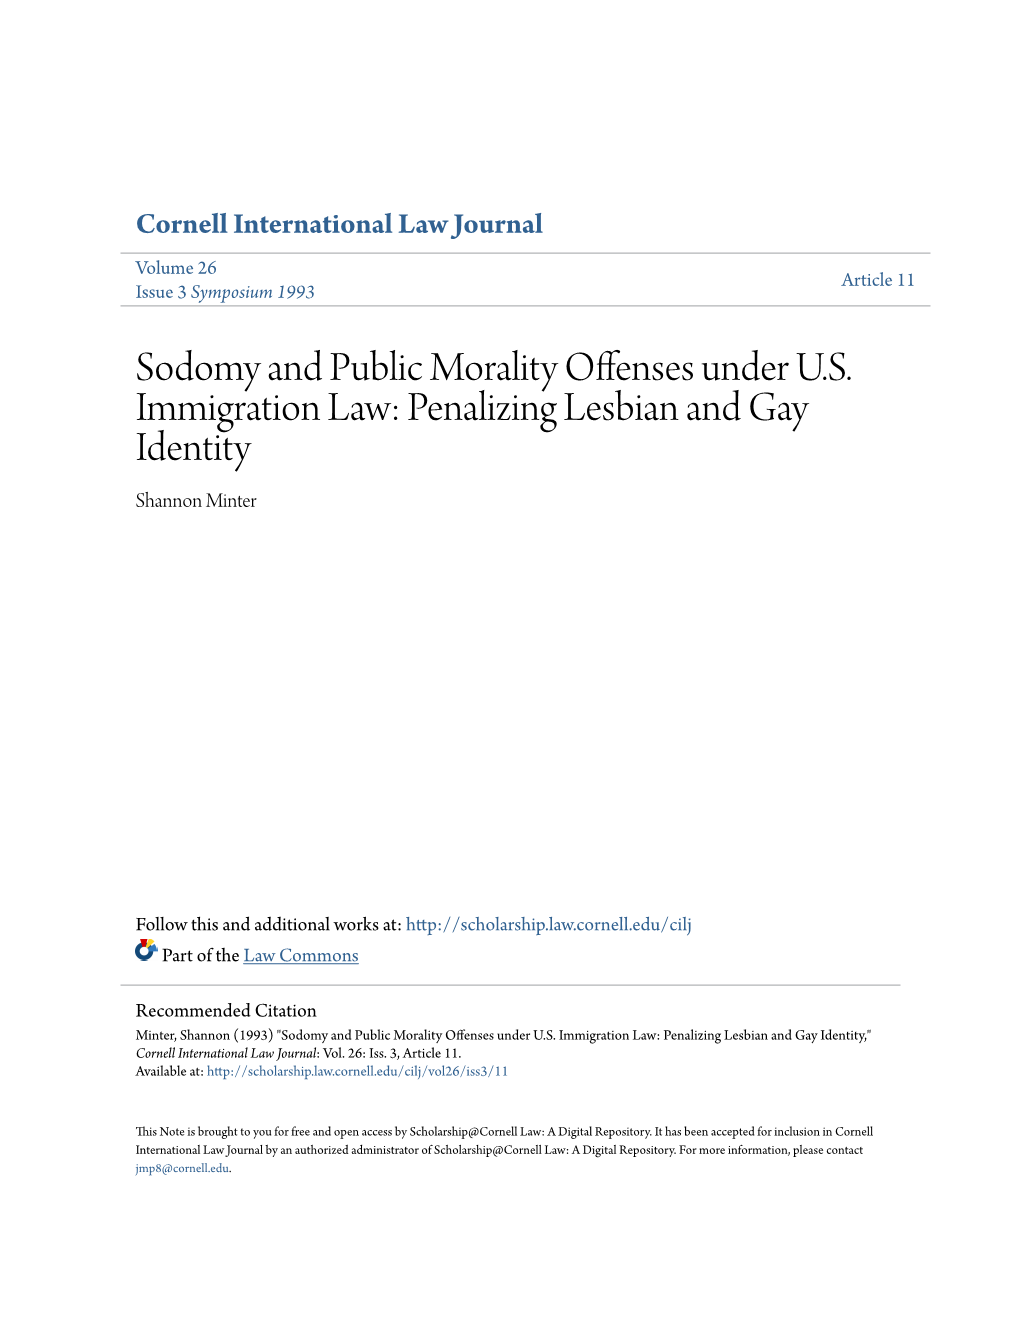 Sodomy and Public Morality Offenses Under U.S. Immigration Law: Penalizing Lesbian and Gay Identity Shannon Minter